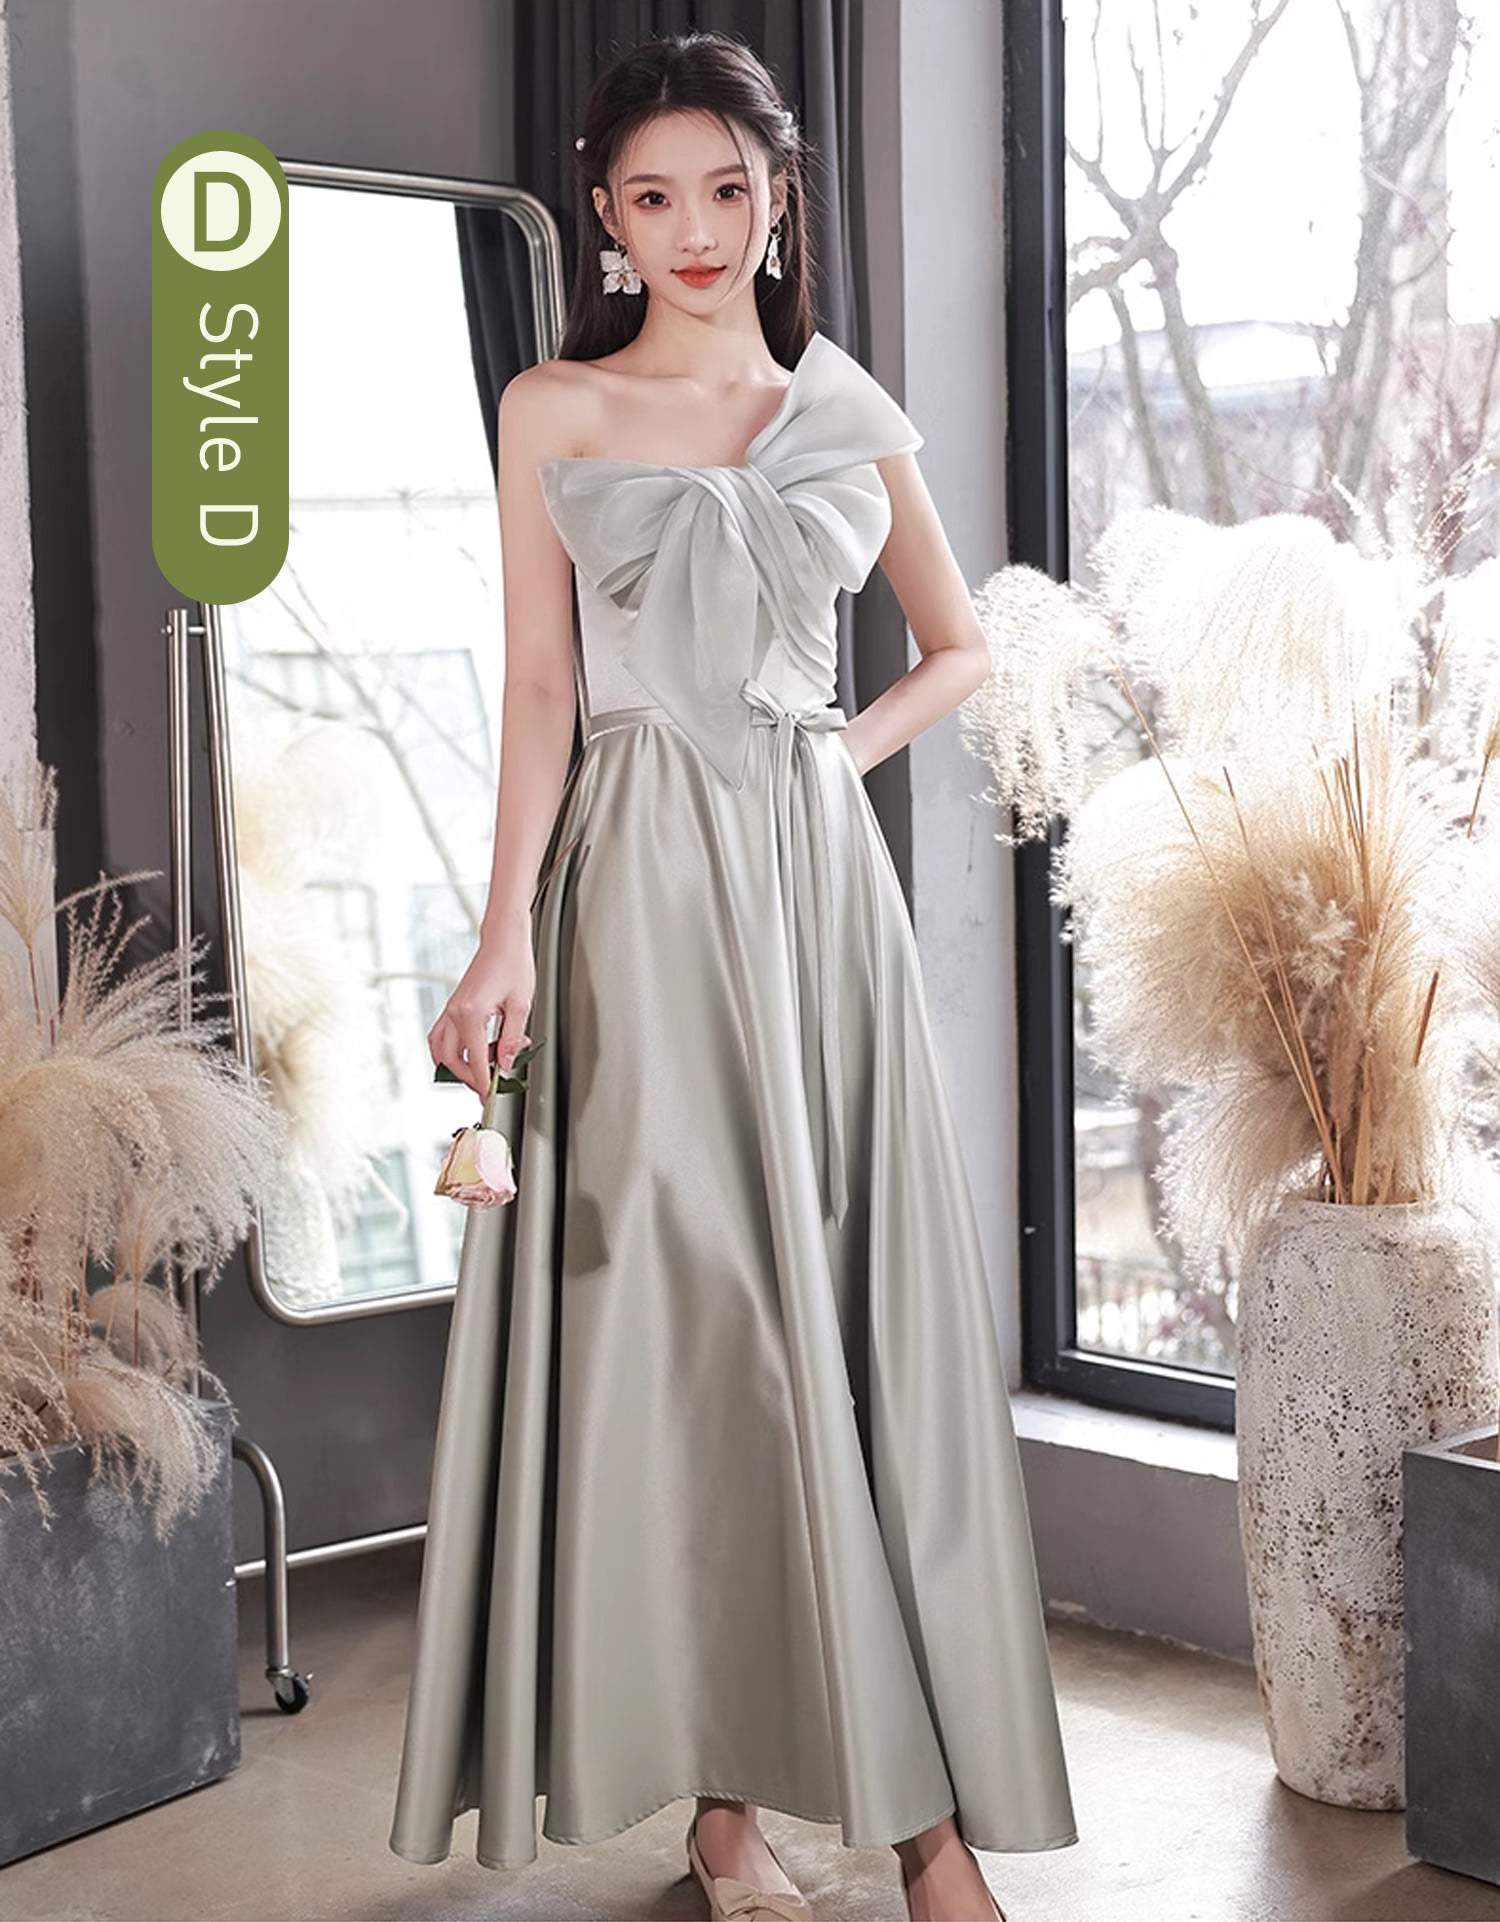 Simple-Gray-Satin-Bridesmaid-Dress-Sweet-Casual-Party-Ball-Gown24